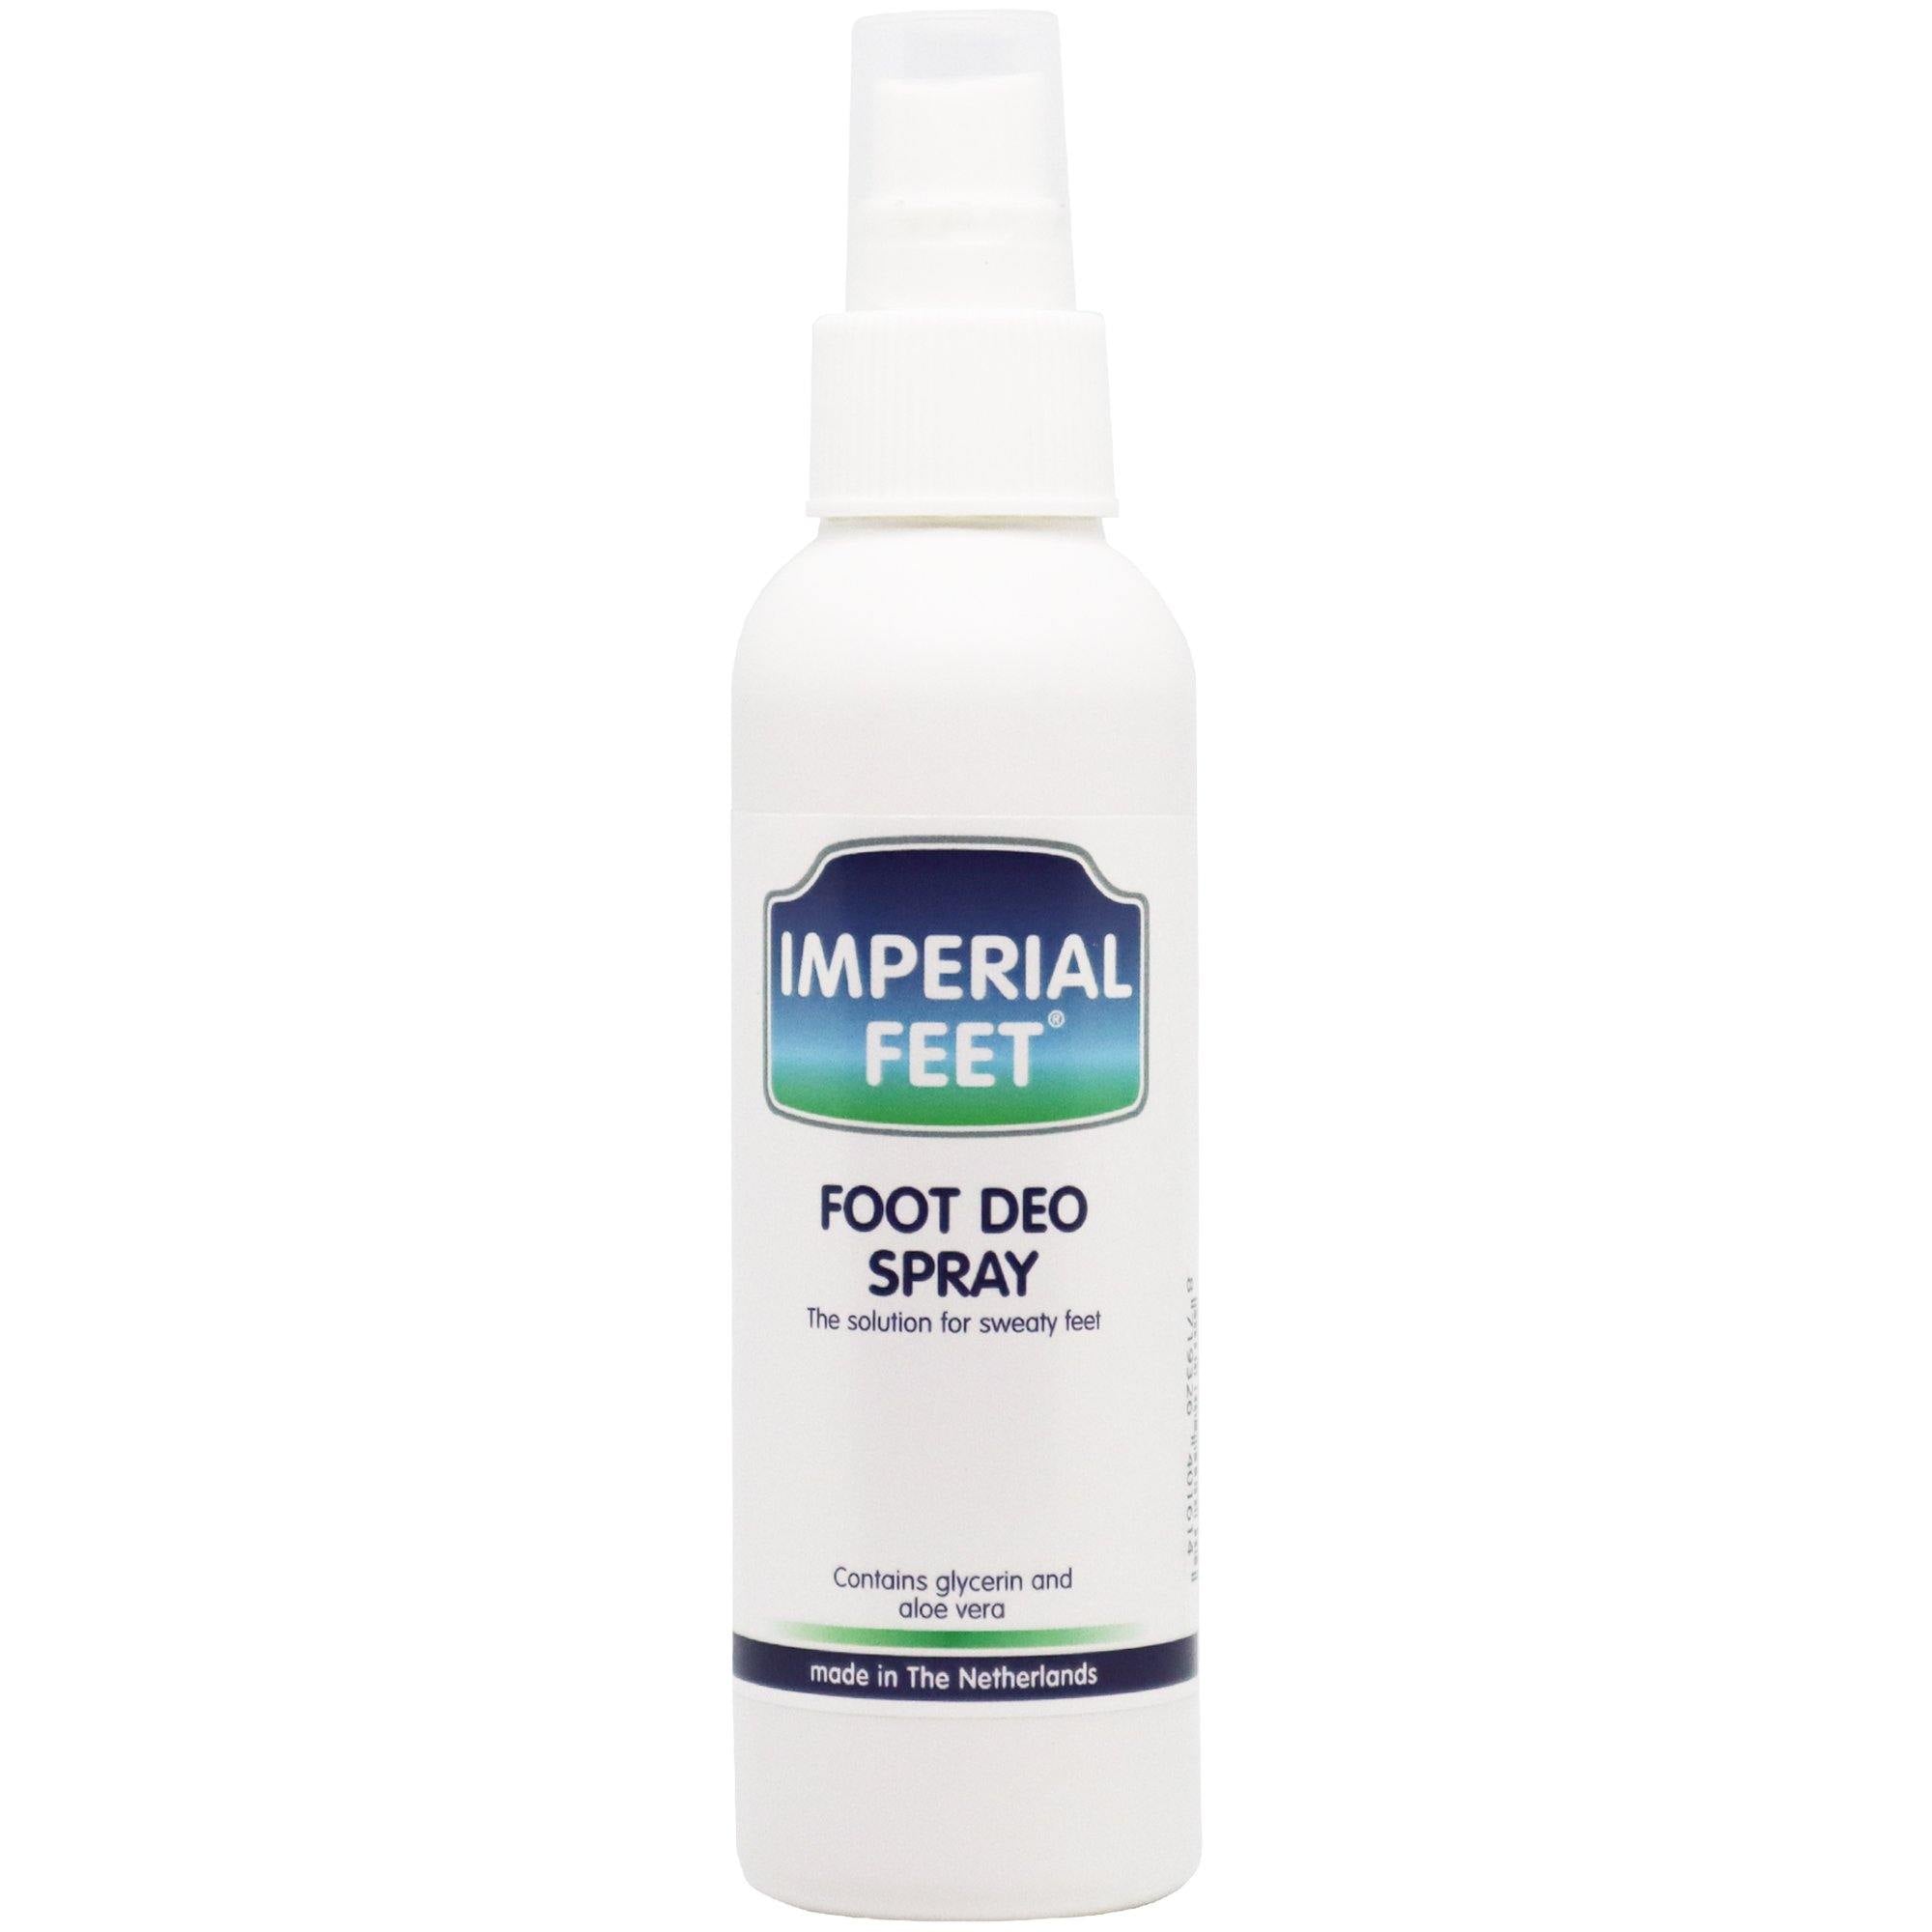 Foot Deo Spray - Imperial Feet - Foot care products - Anti Fungal Treatments, B2C, Extra Care